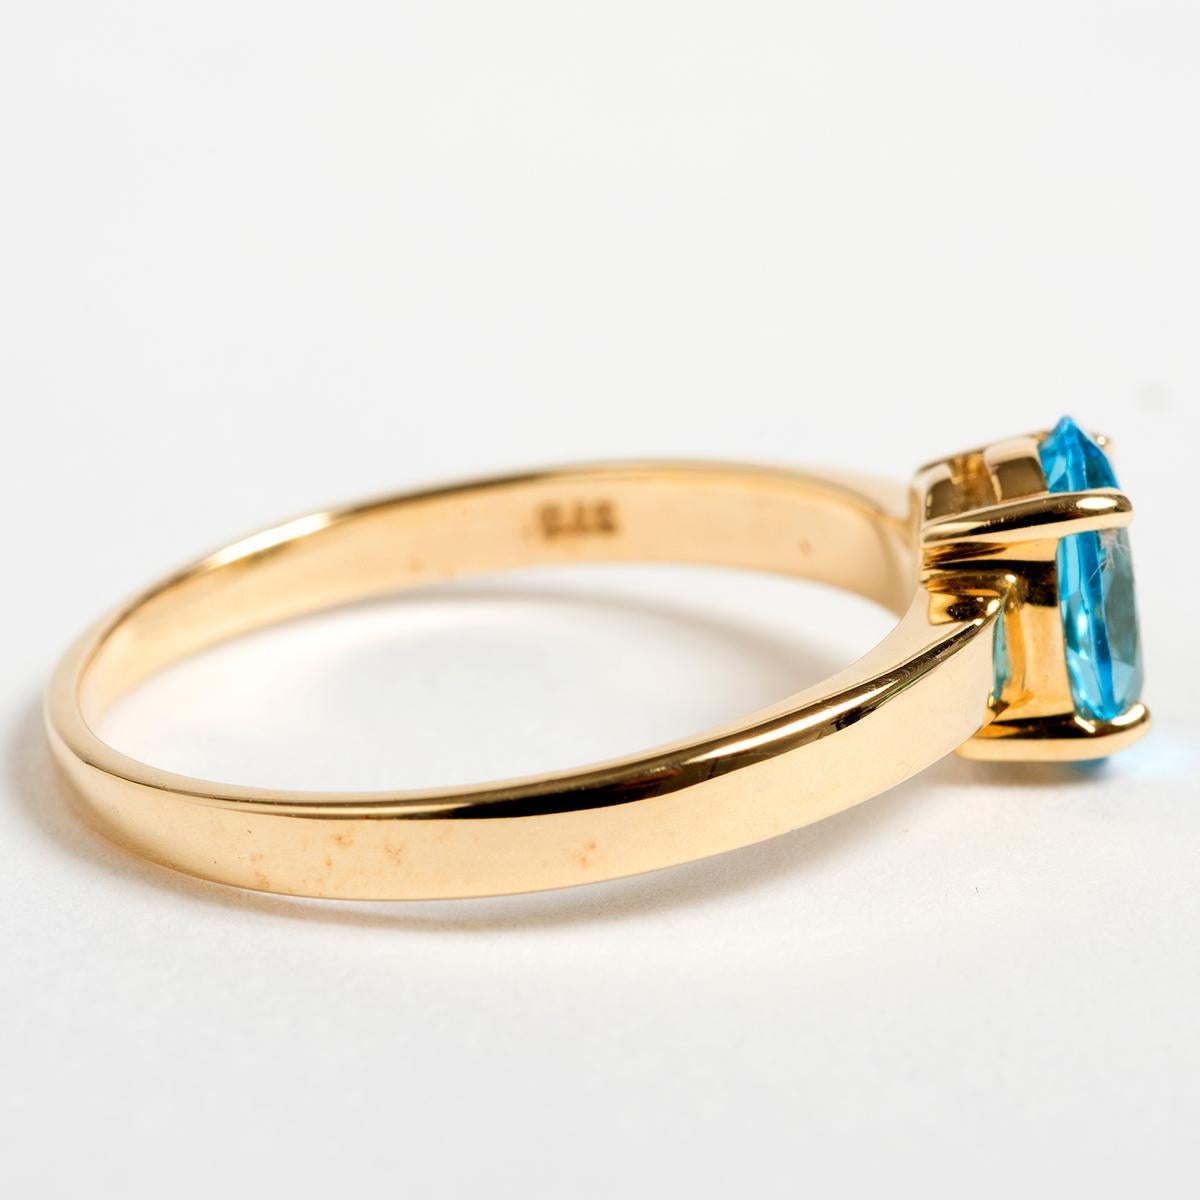 A unique piece within our carefully curated Vintage & Prestige fine jewellery collection, we are delighted to present the following: This delicate 9K yellow gold blue topaz ring, comes in UK size M 1/2, US size 6 1/2.